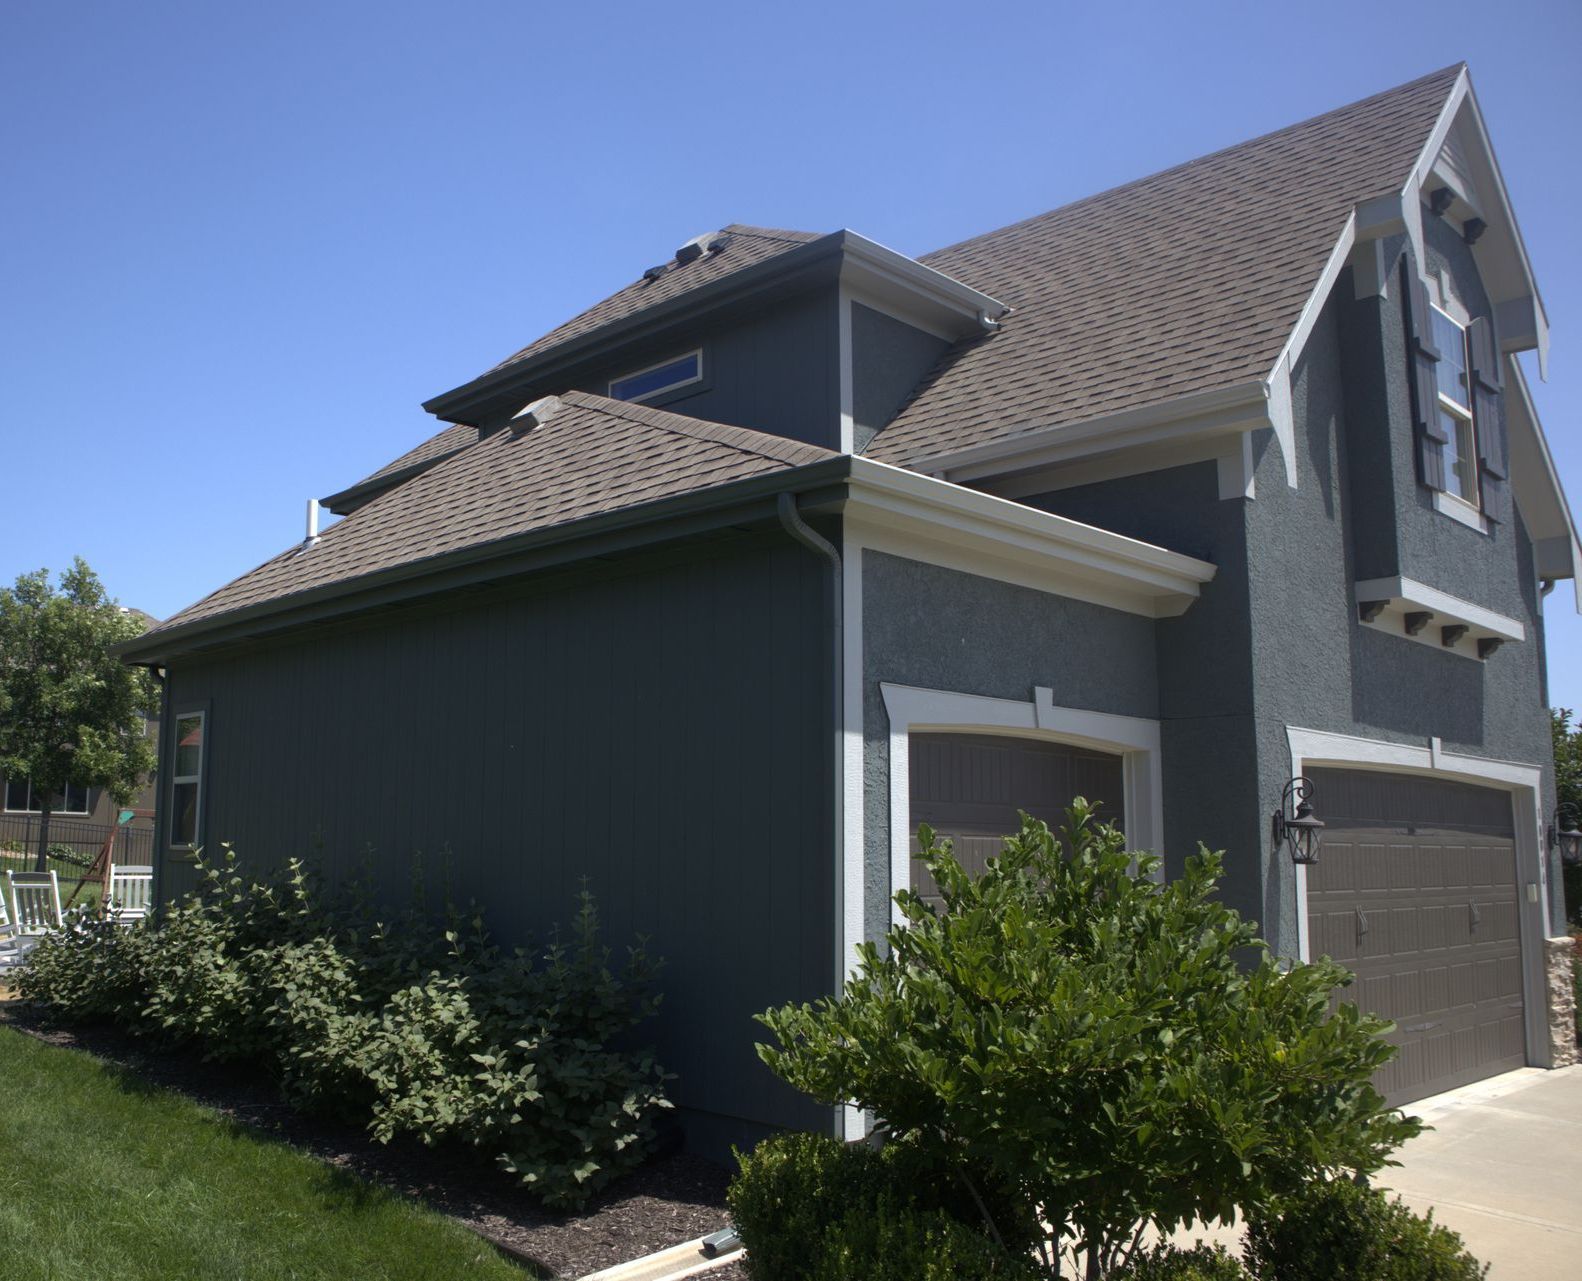 house located in lenexa ks painted by home pros painting using as case staudy